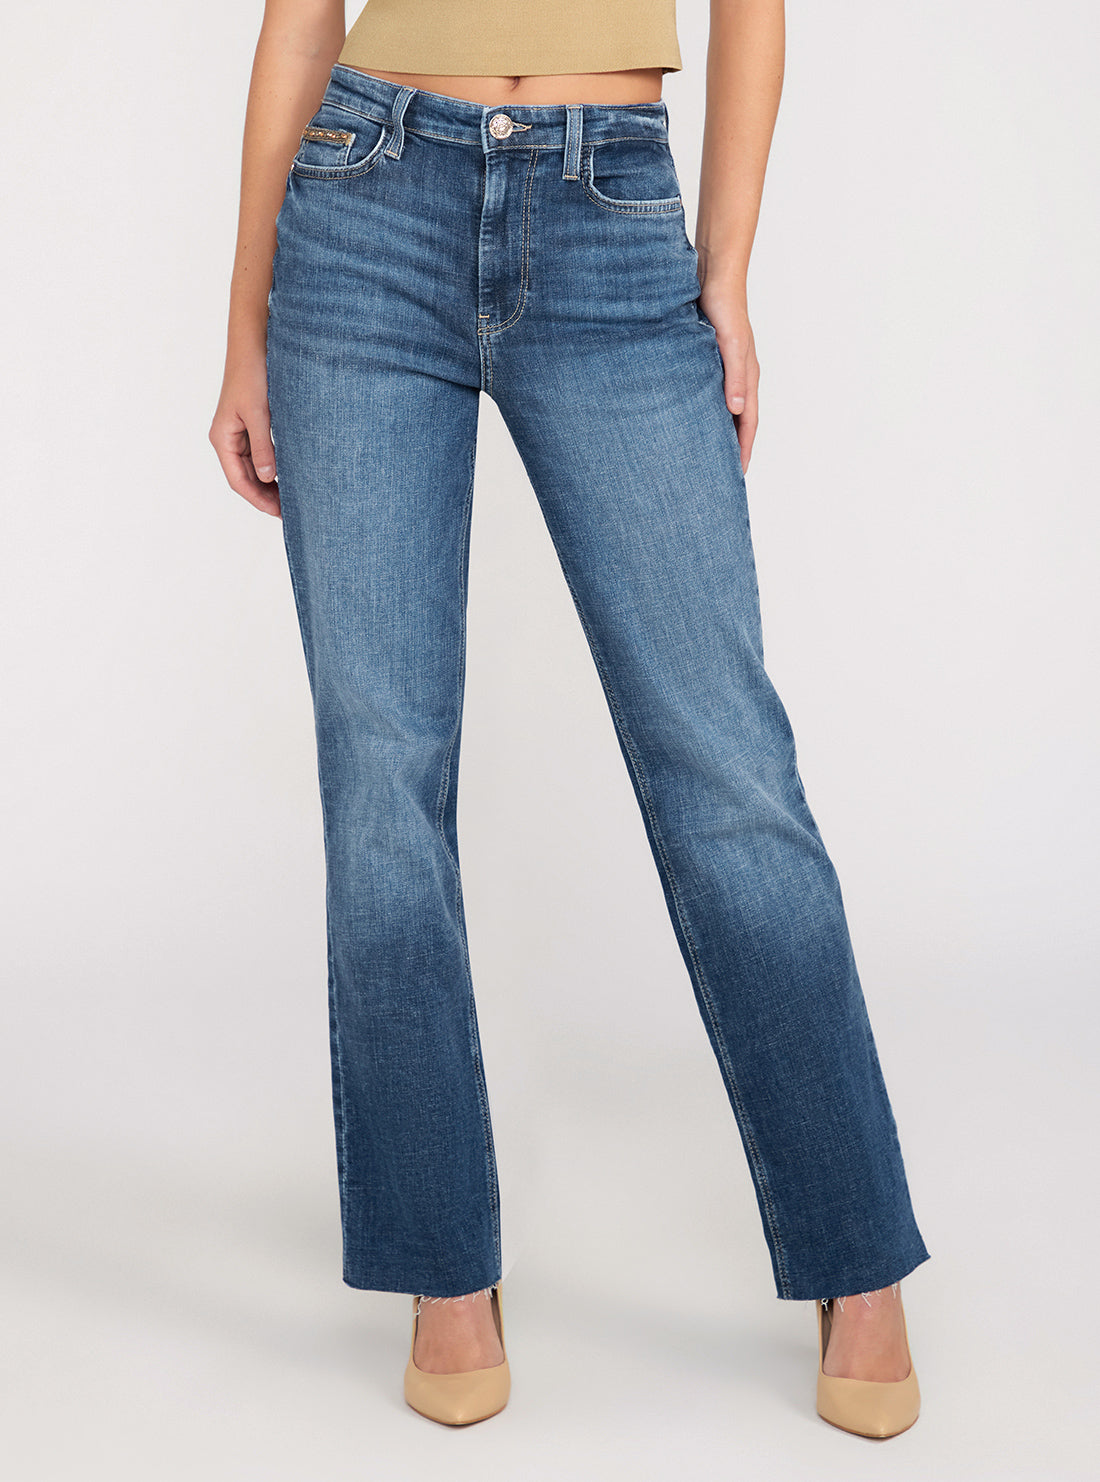 GUESS Mid-Rise Straight Leg 80s Denim Jeans front view